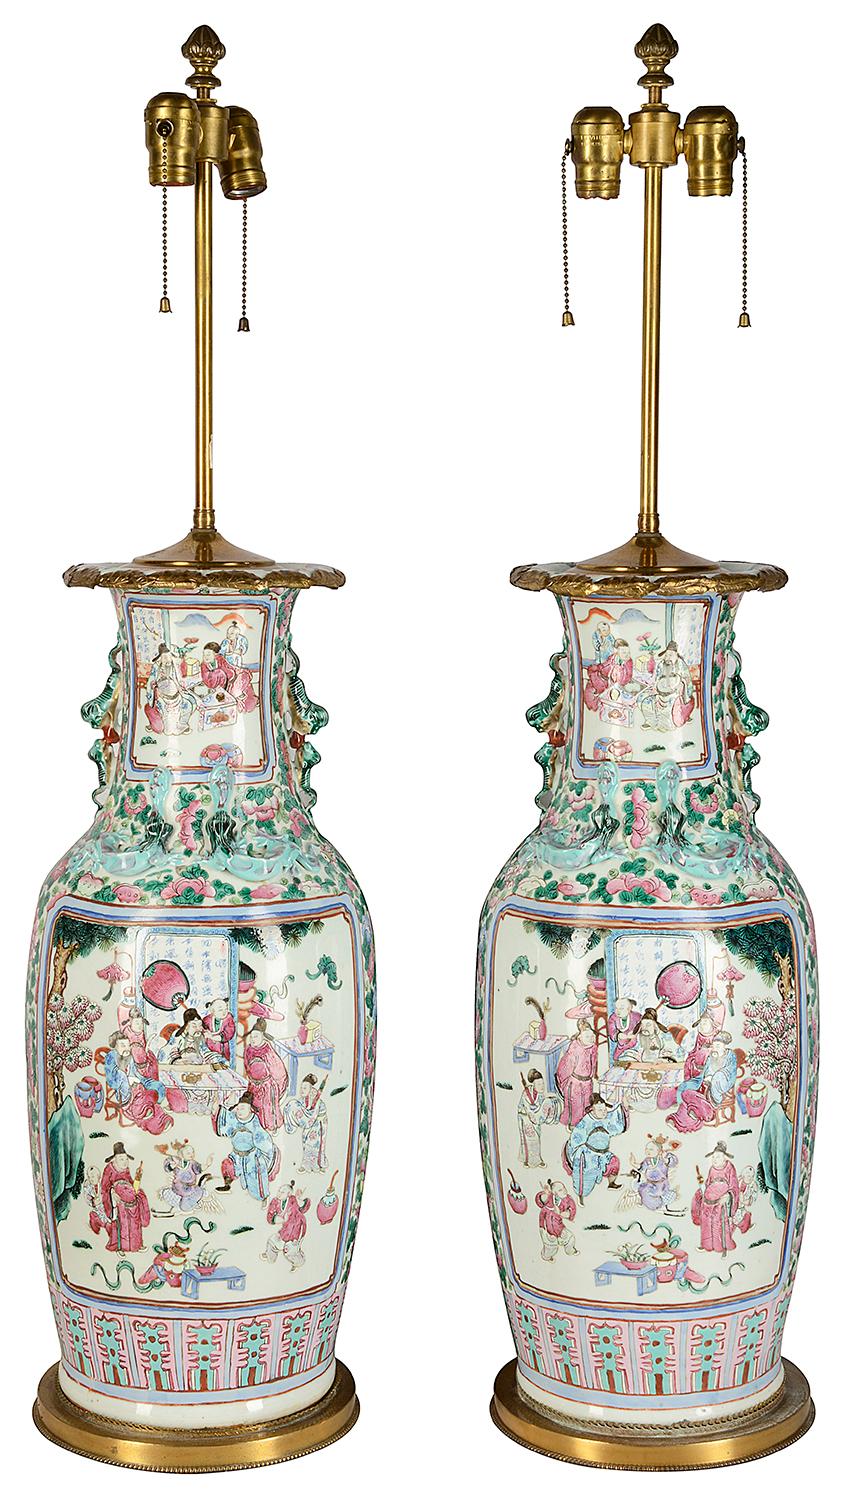 A large pair of Chinese famille rose vases / lamps each with a pink and blue ground, dog of faux handles to either side, ormolu leaf decoration to the rims, inset painted panels depicting classical Chinese scenes of courtiers attendants and